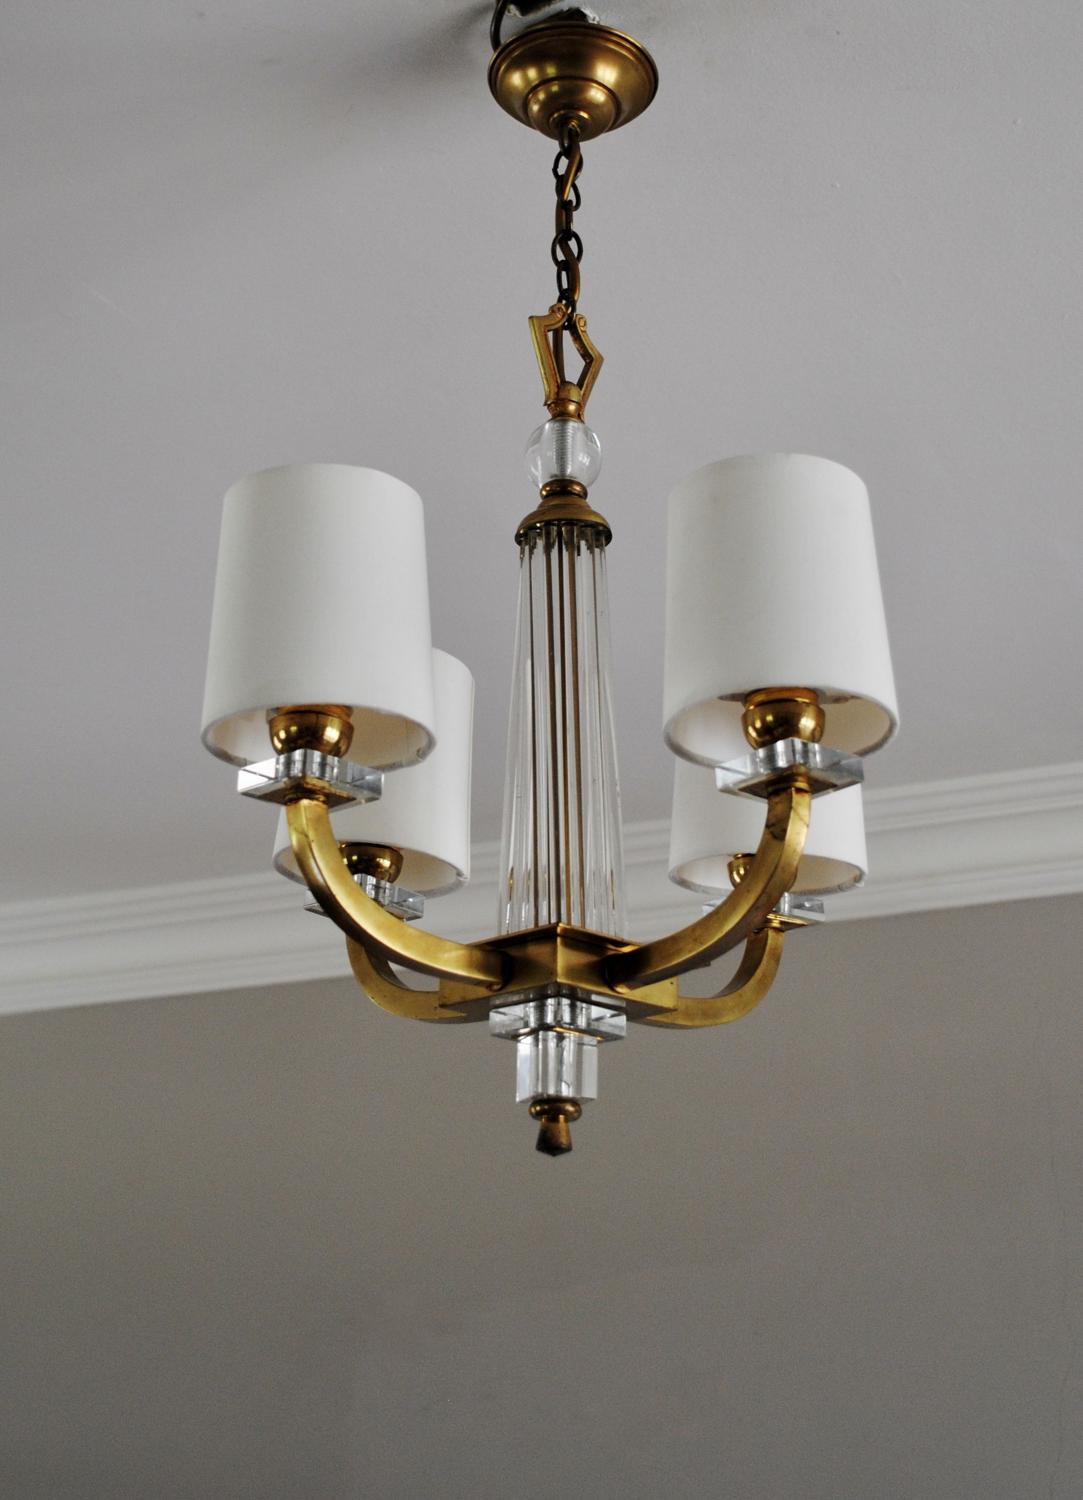 French Art Deco chandelier with 4 arms